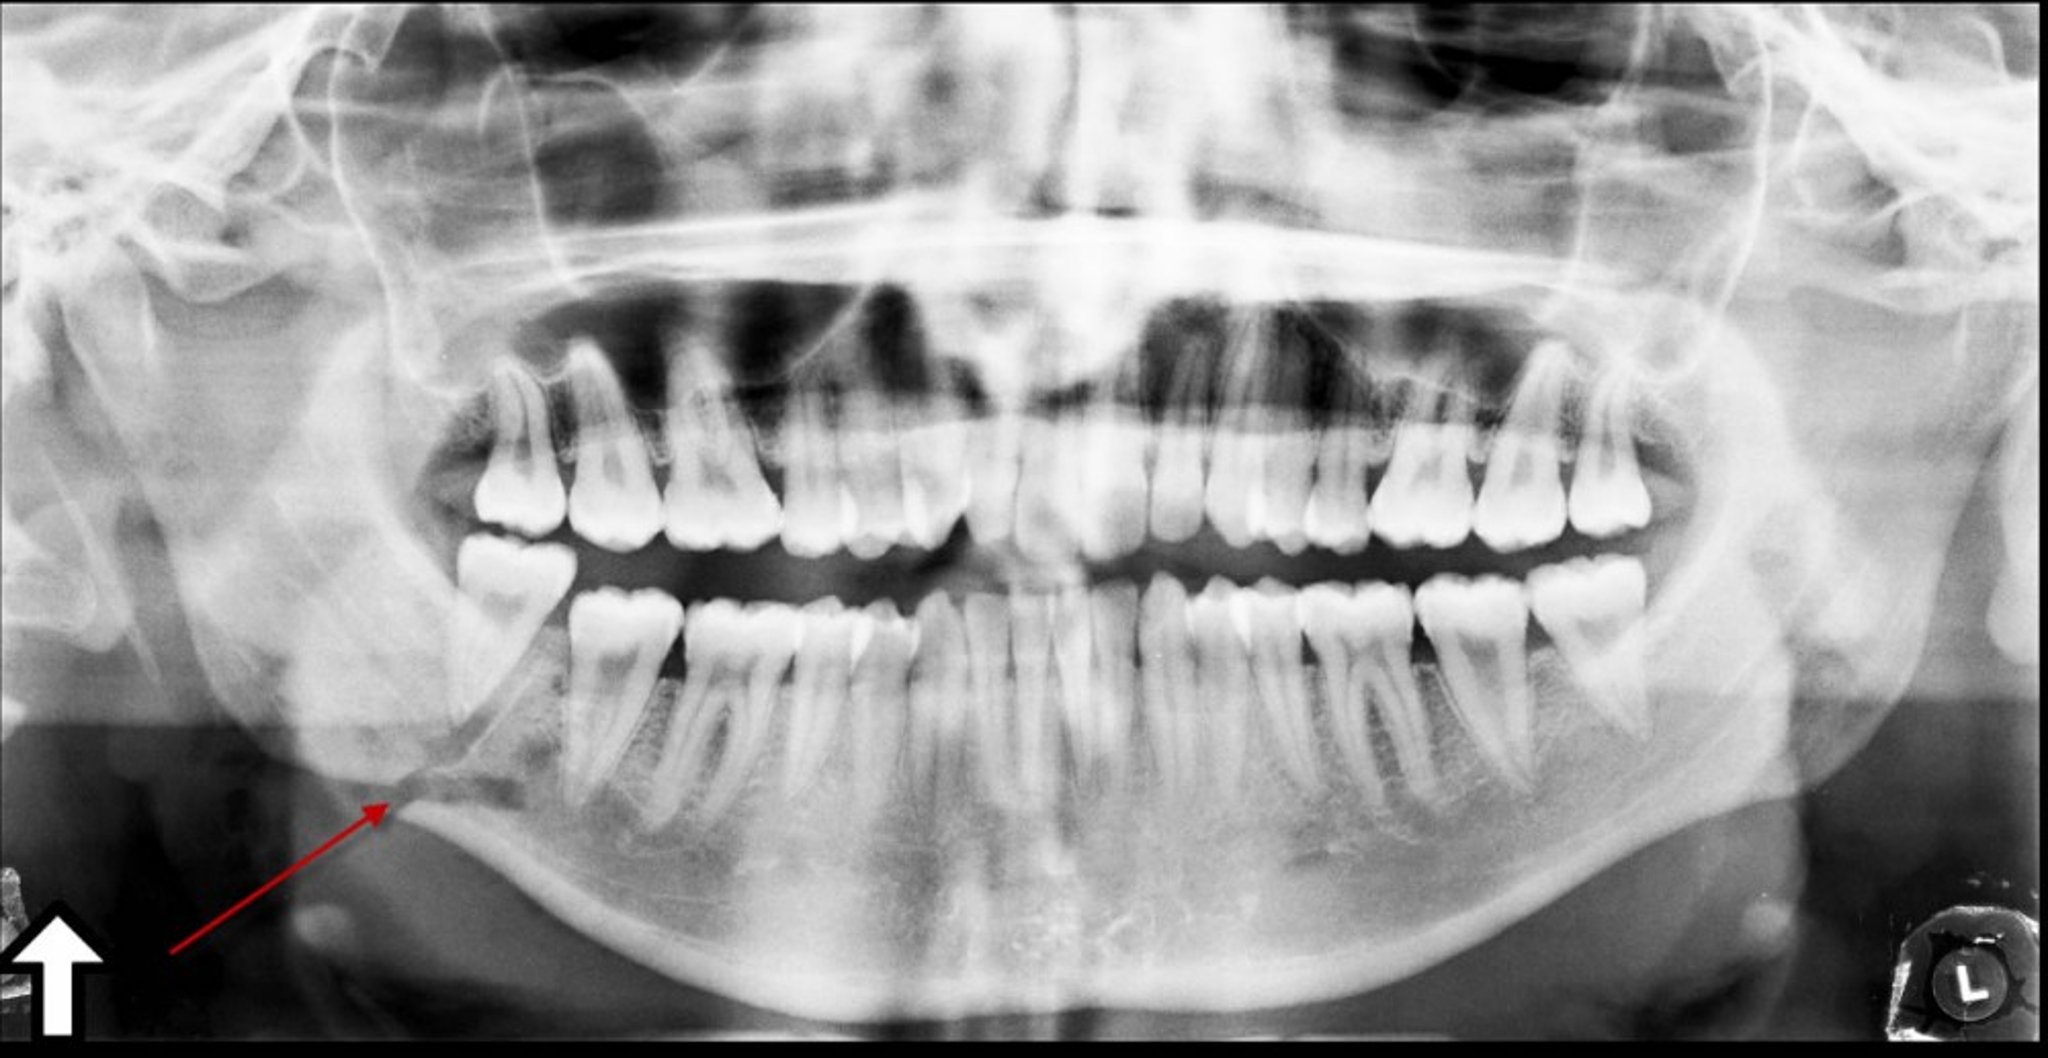 Fracture of the Angle of the Mandible